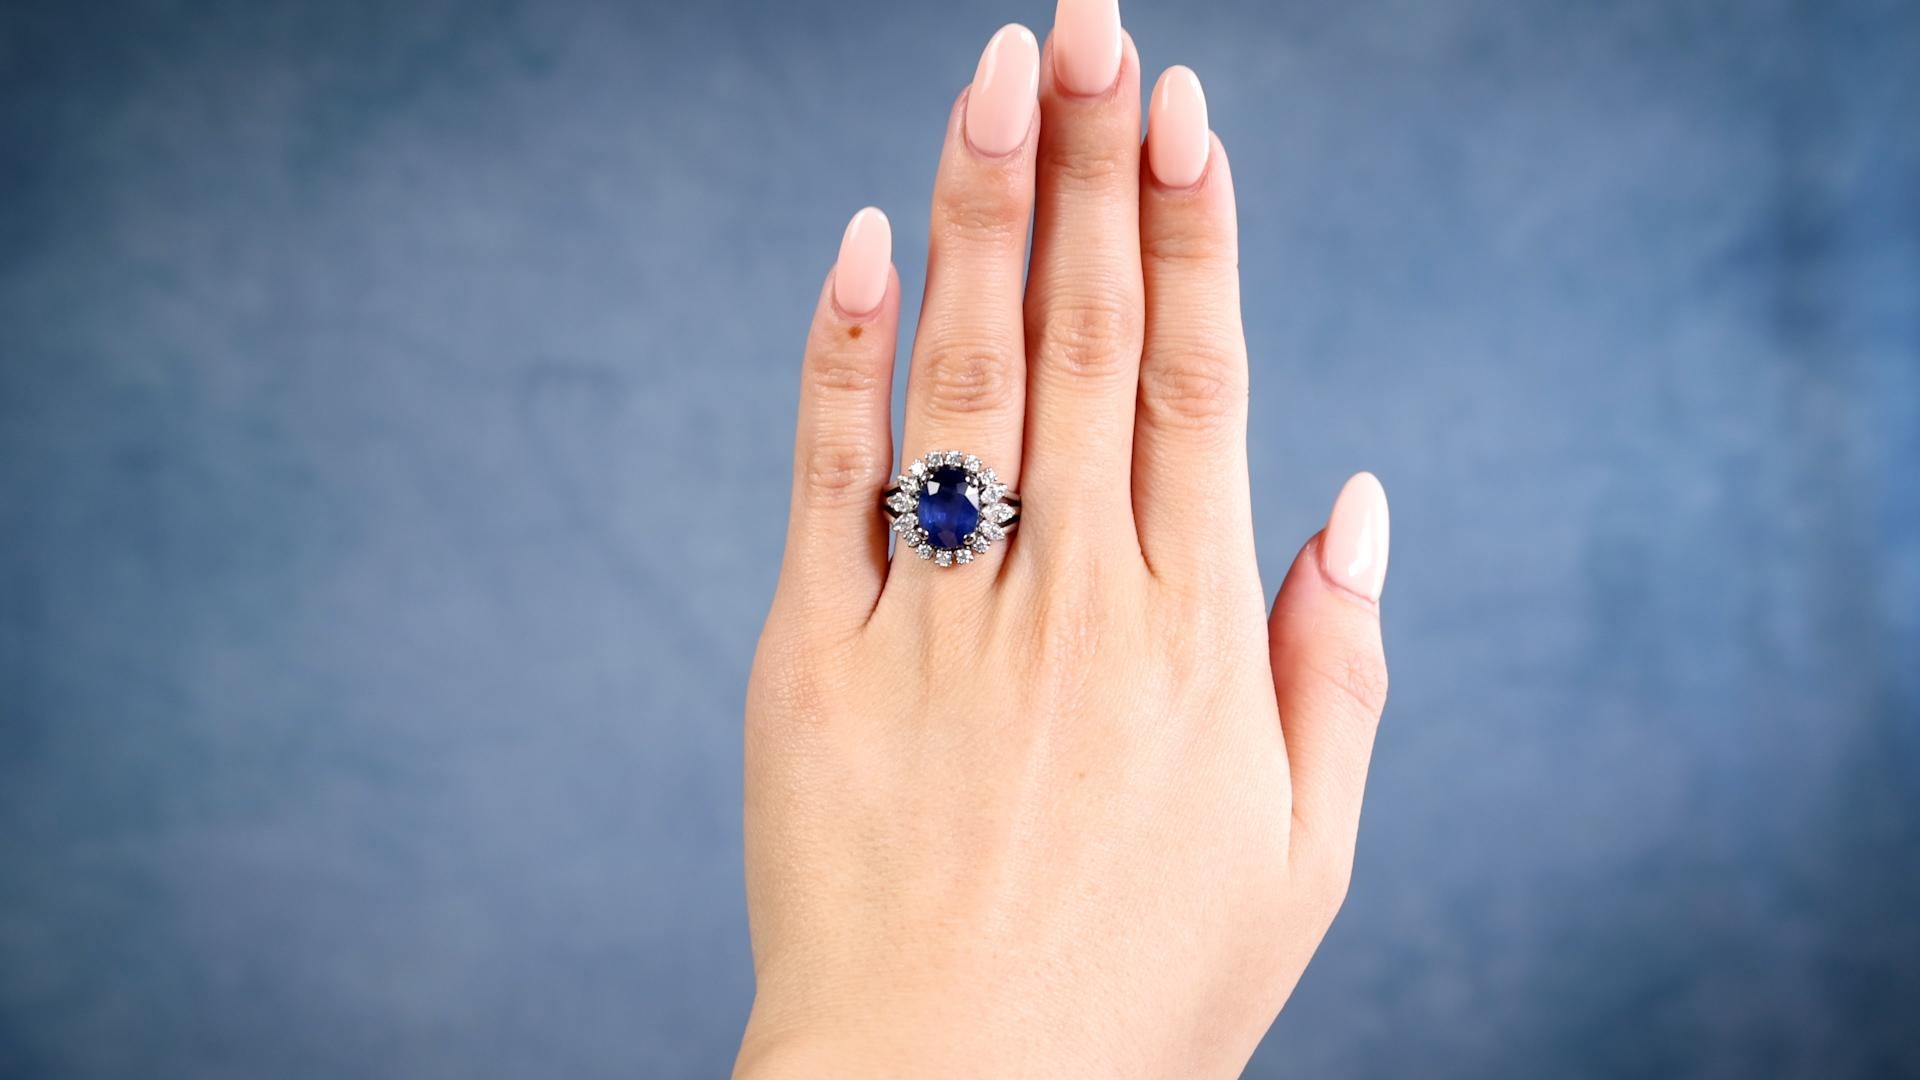 One Mid-Century GIA 3.94 Carat Ceylon Sapphire Diamond Platinum Ring. Featuring one GIA oval mixed cut sapphire of 3.94 carats, accompanied by GIA #2231196557 stating the sapphire is of Ceylon (Sri Lanka) origin. Accented by ten round brilliant and